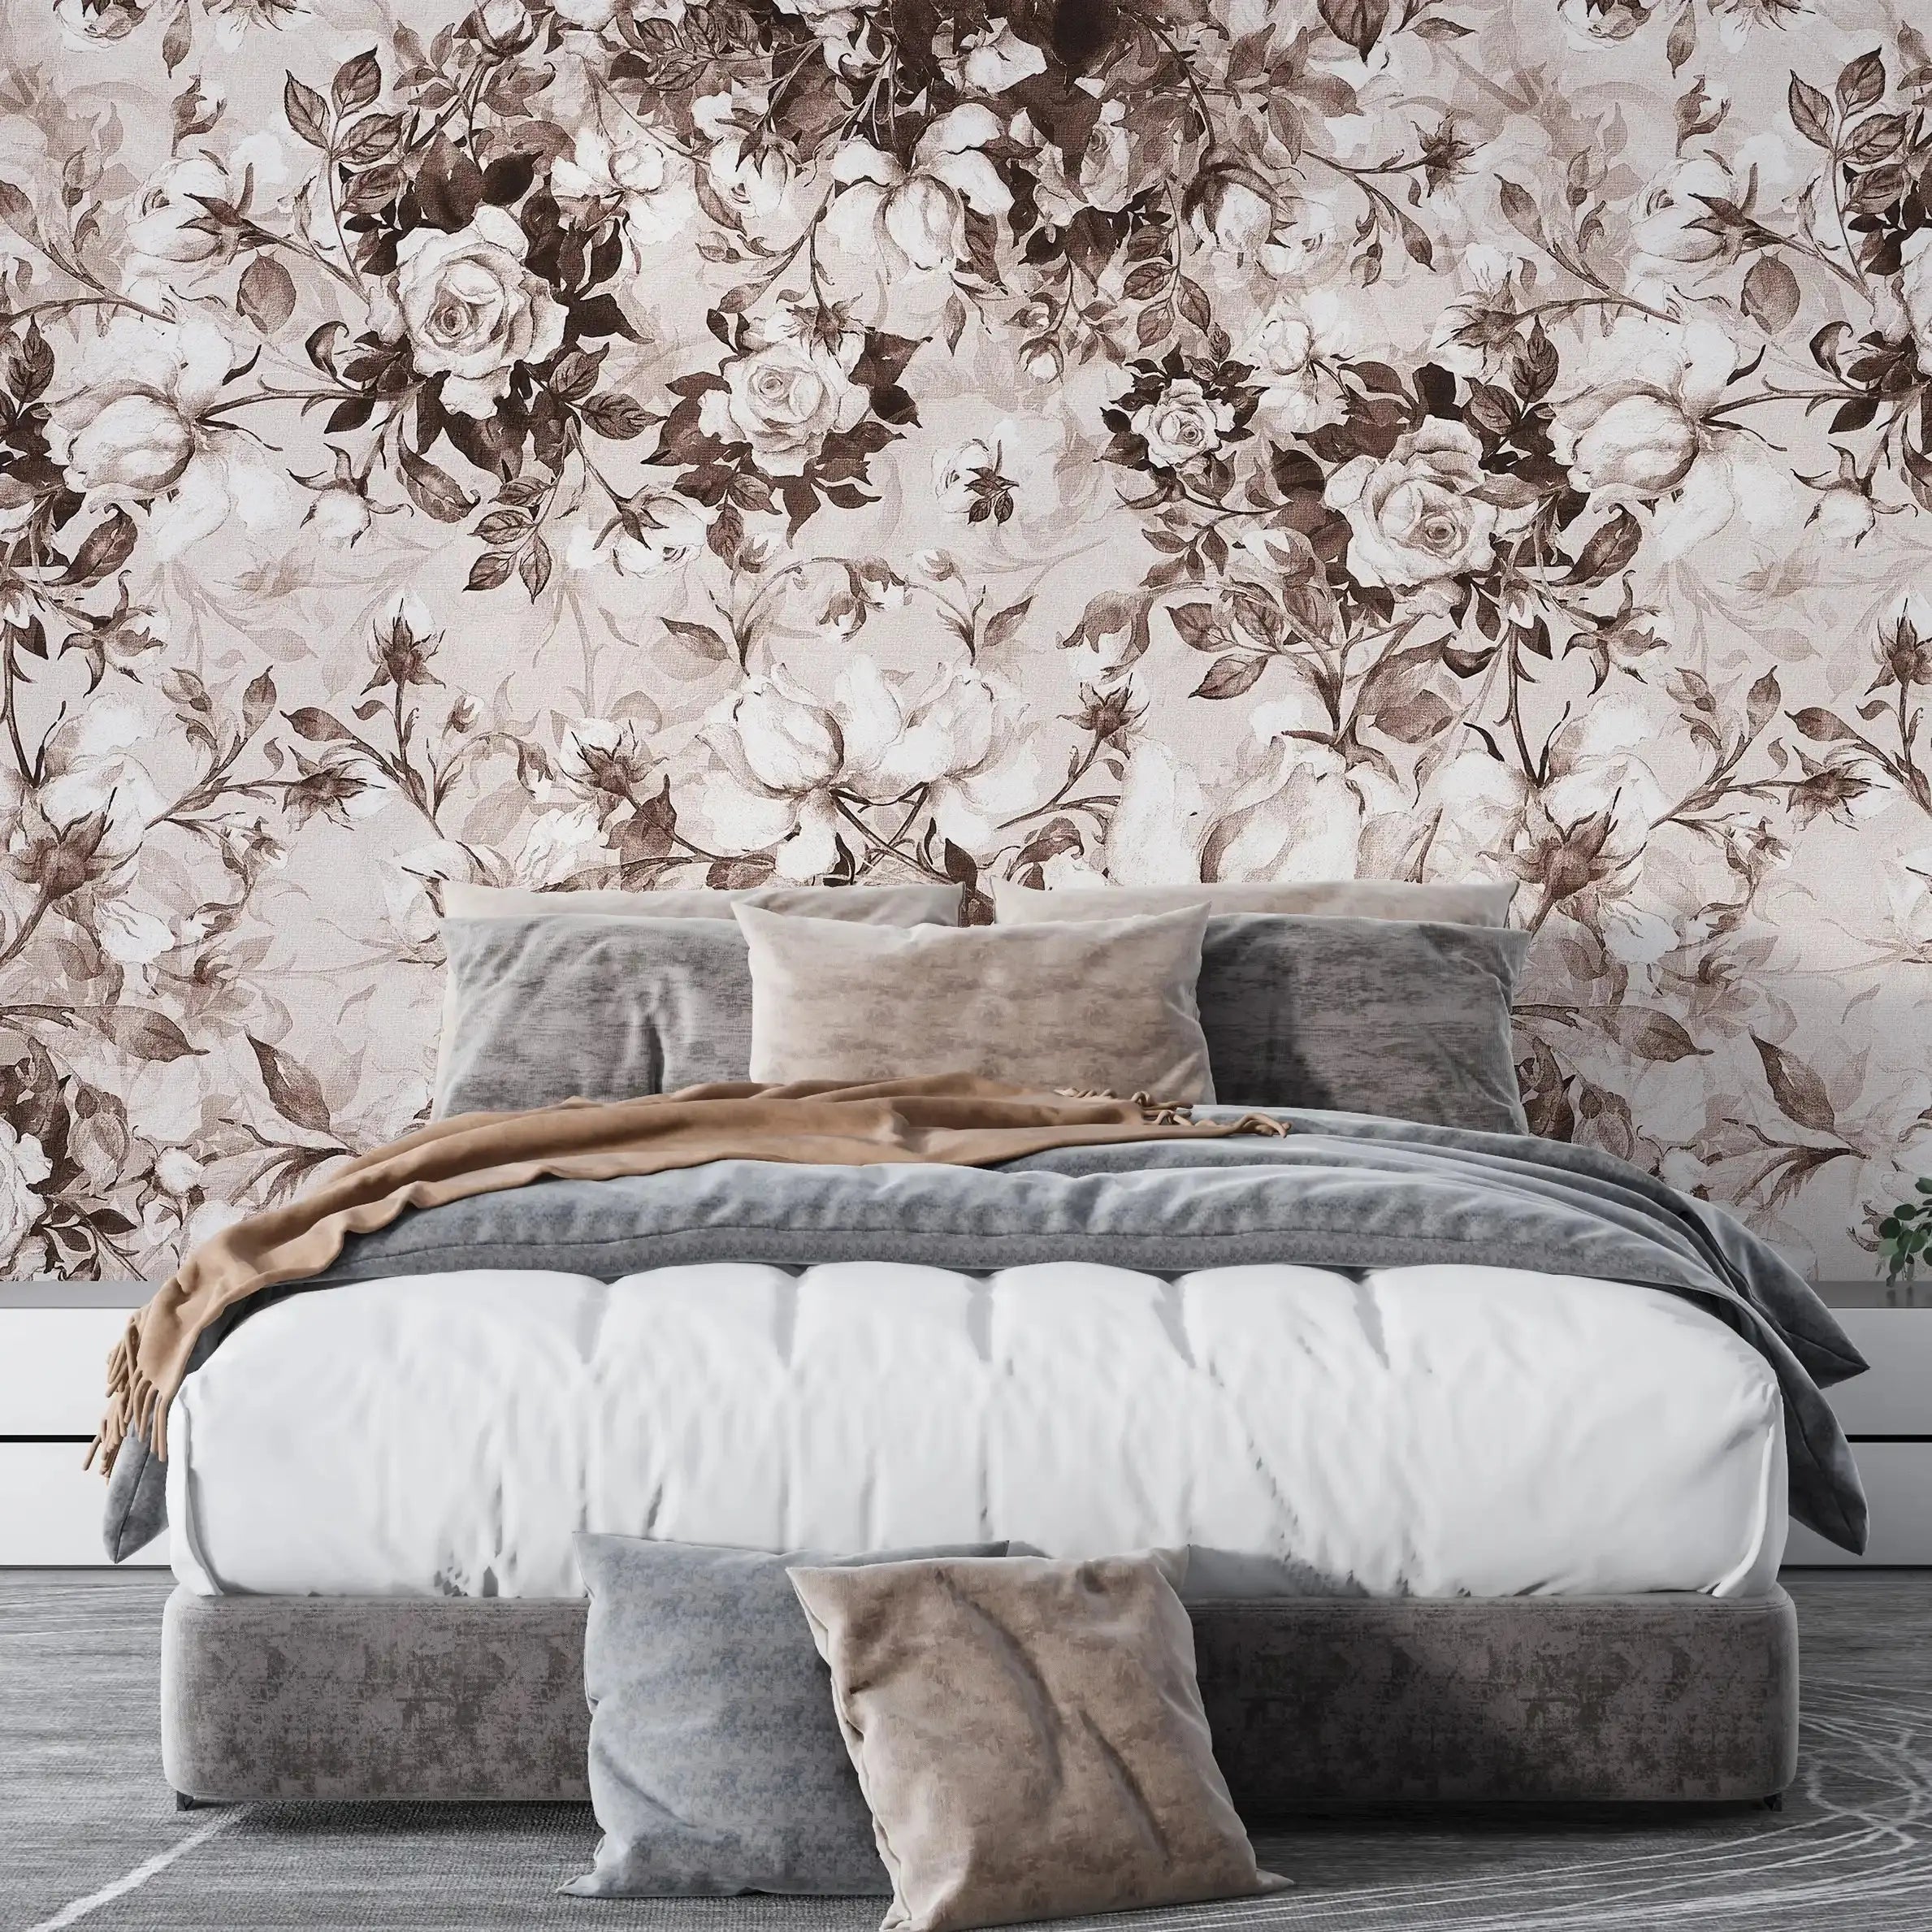 3043-D / Pink Floral Self-Adhesive Wallpaper: Easy Peel and Stick Wall Mural, Modern Room Decor, Bathroom, and Kitchen - Artevella